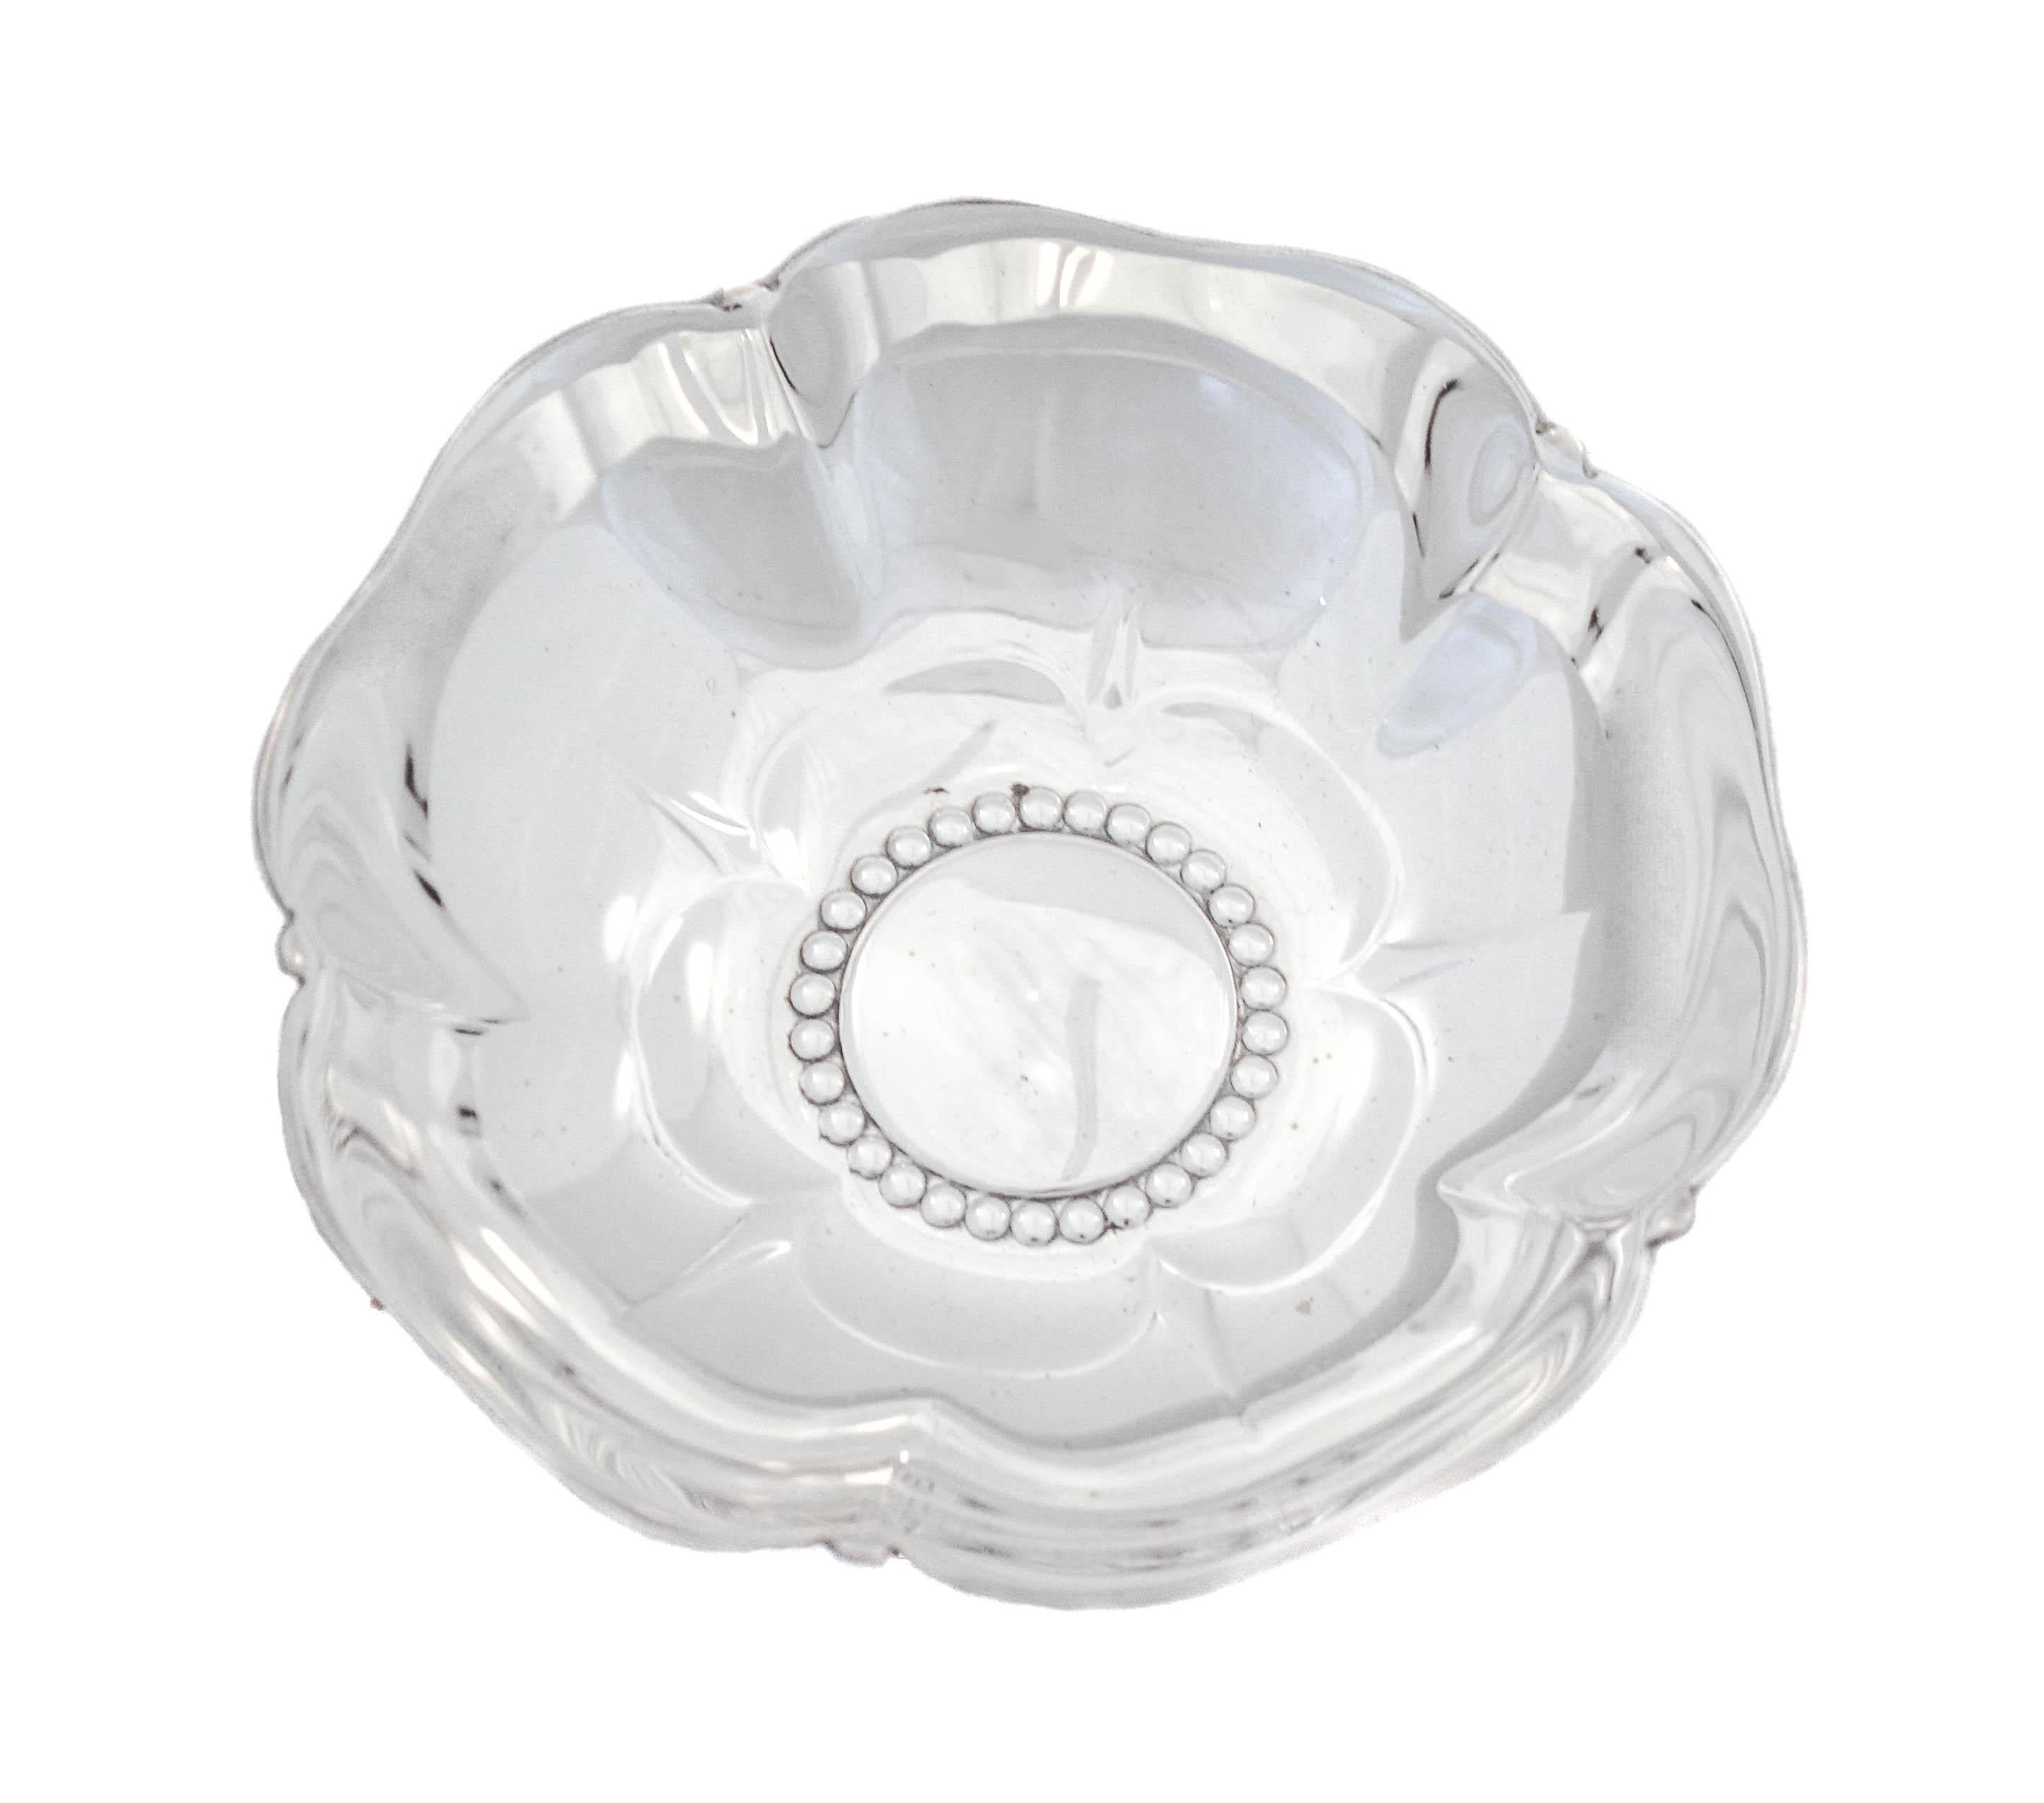 This sterling silver dish by the world renowned Tiffany & Co. is a magnificent example of mid-century silver. The rim is scalloped rim and the center has a beaded pattern. Designed to look like a flower blooming, the sides slope up giving it a